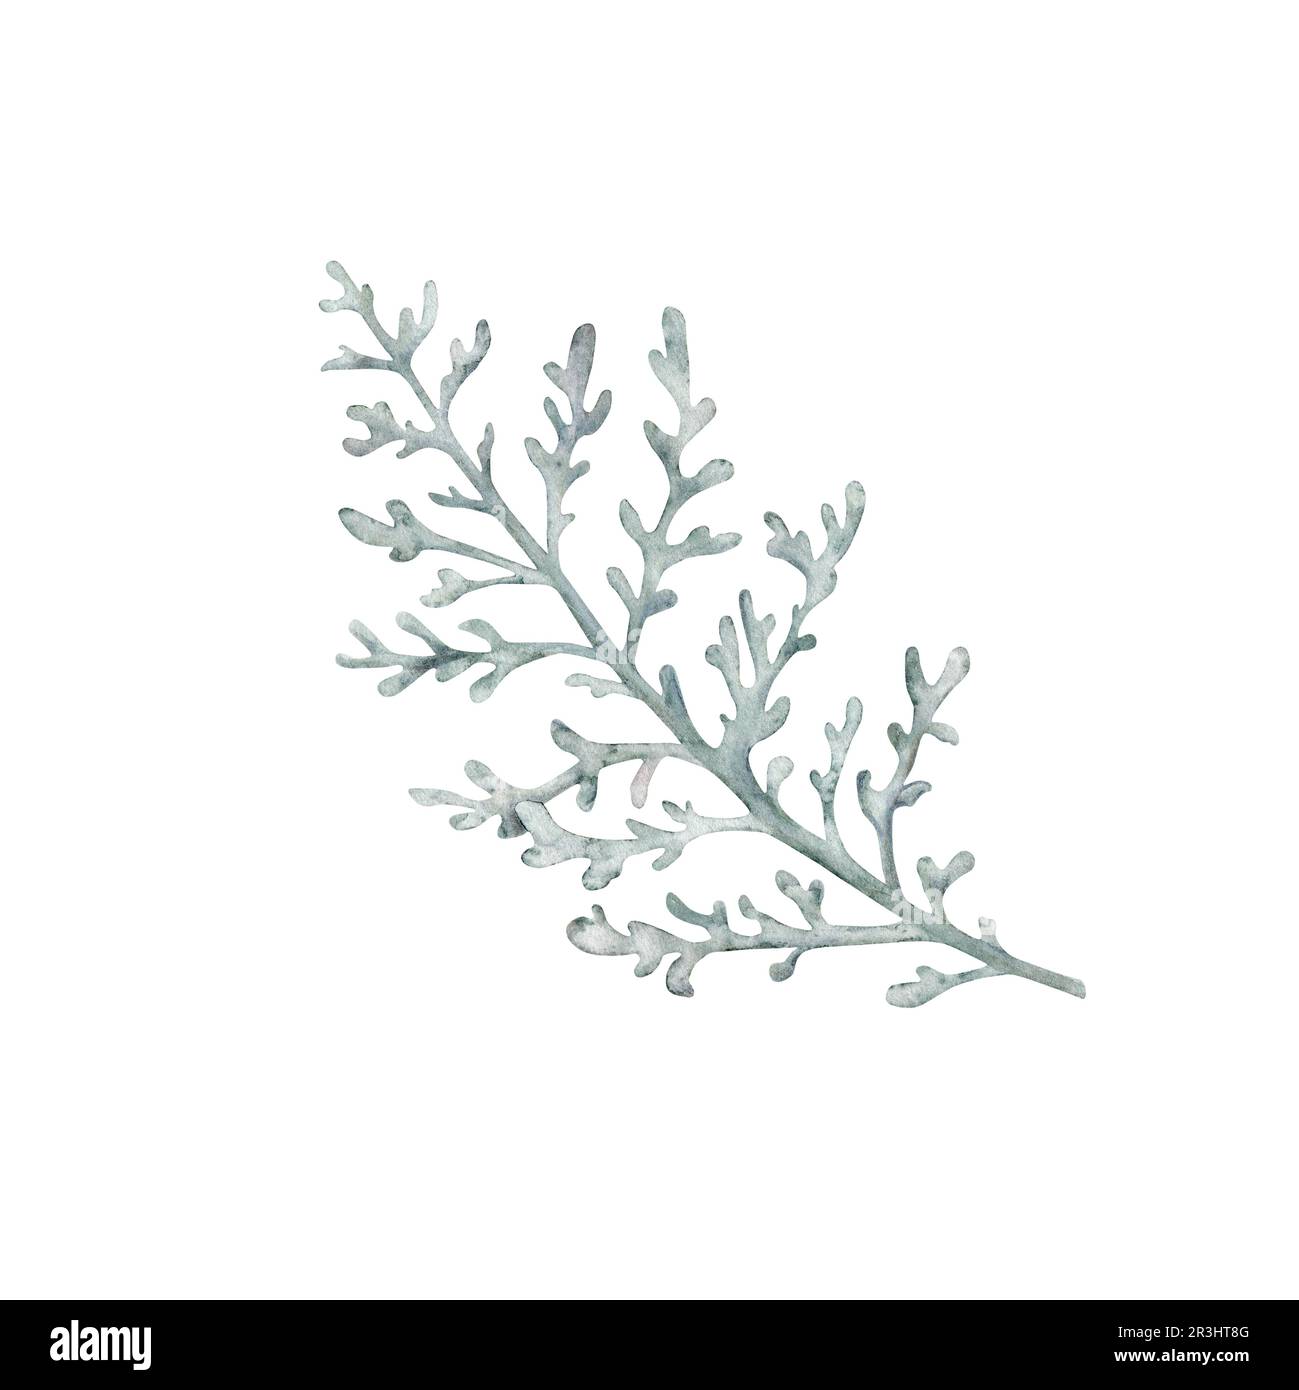 Dusty Miller, Silver Jacobaea maritima plant. Winter botanical leaves. Hand drawn watercolor illustration. Floral plant design for wedding invitation Stock Photo